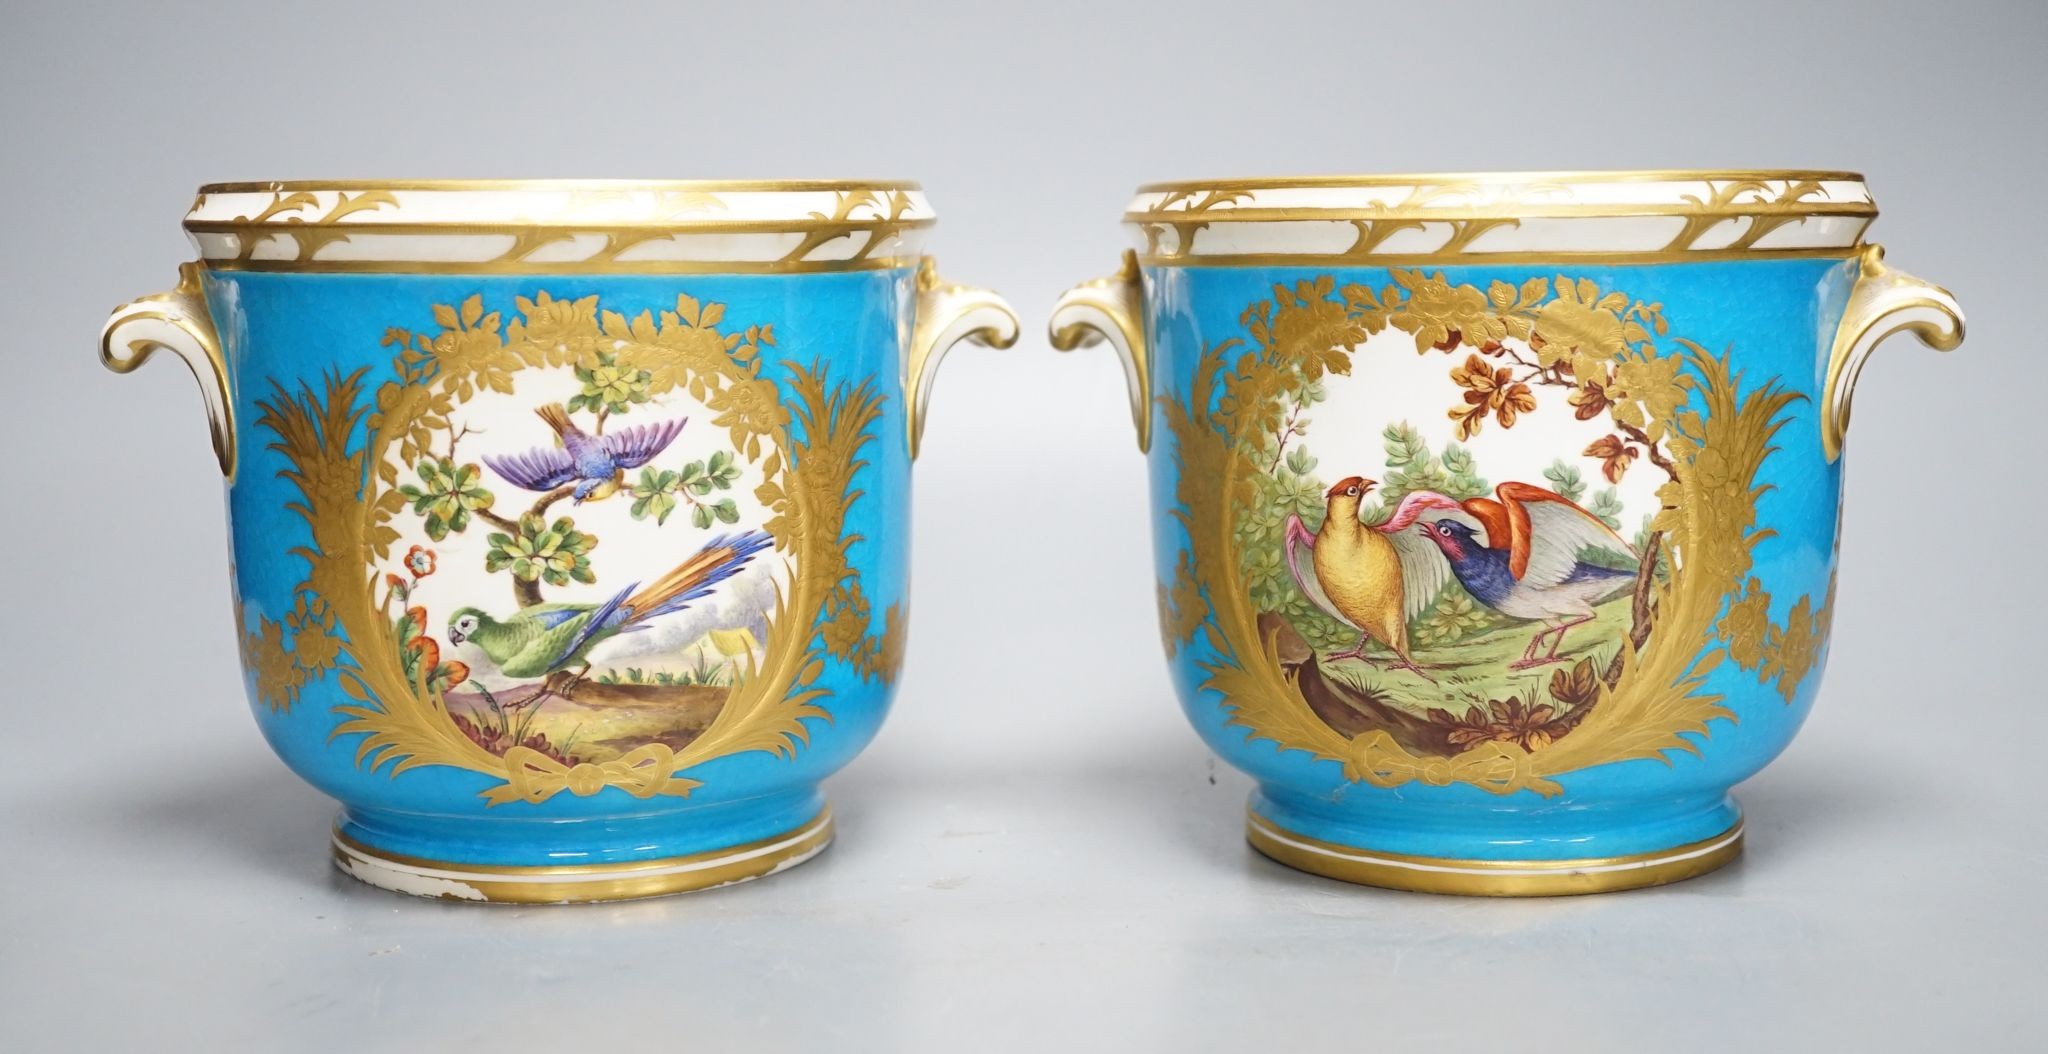 A pair of mid 19th century English porcelain cache pots, 14.5 cms high.